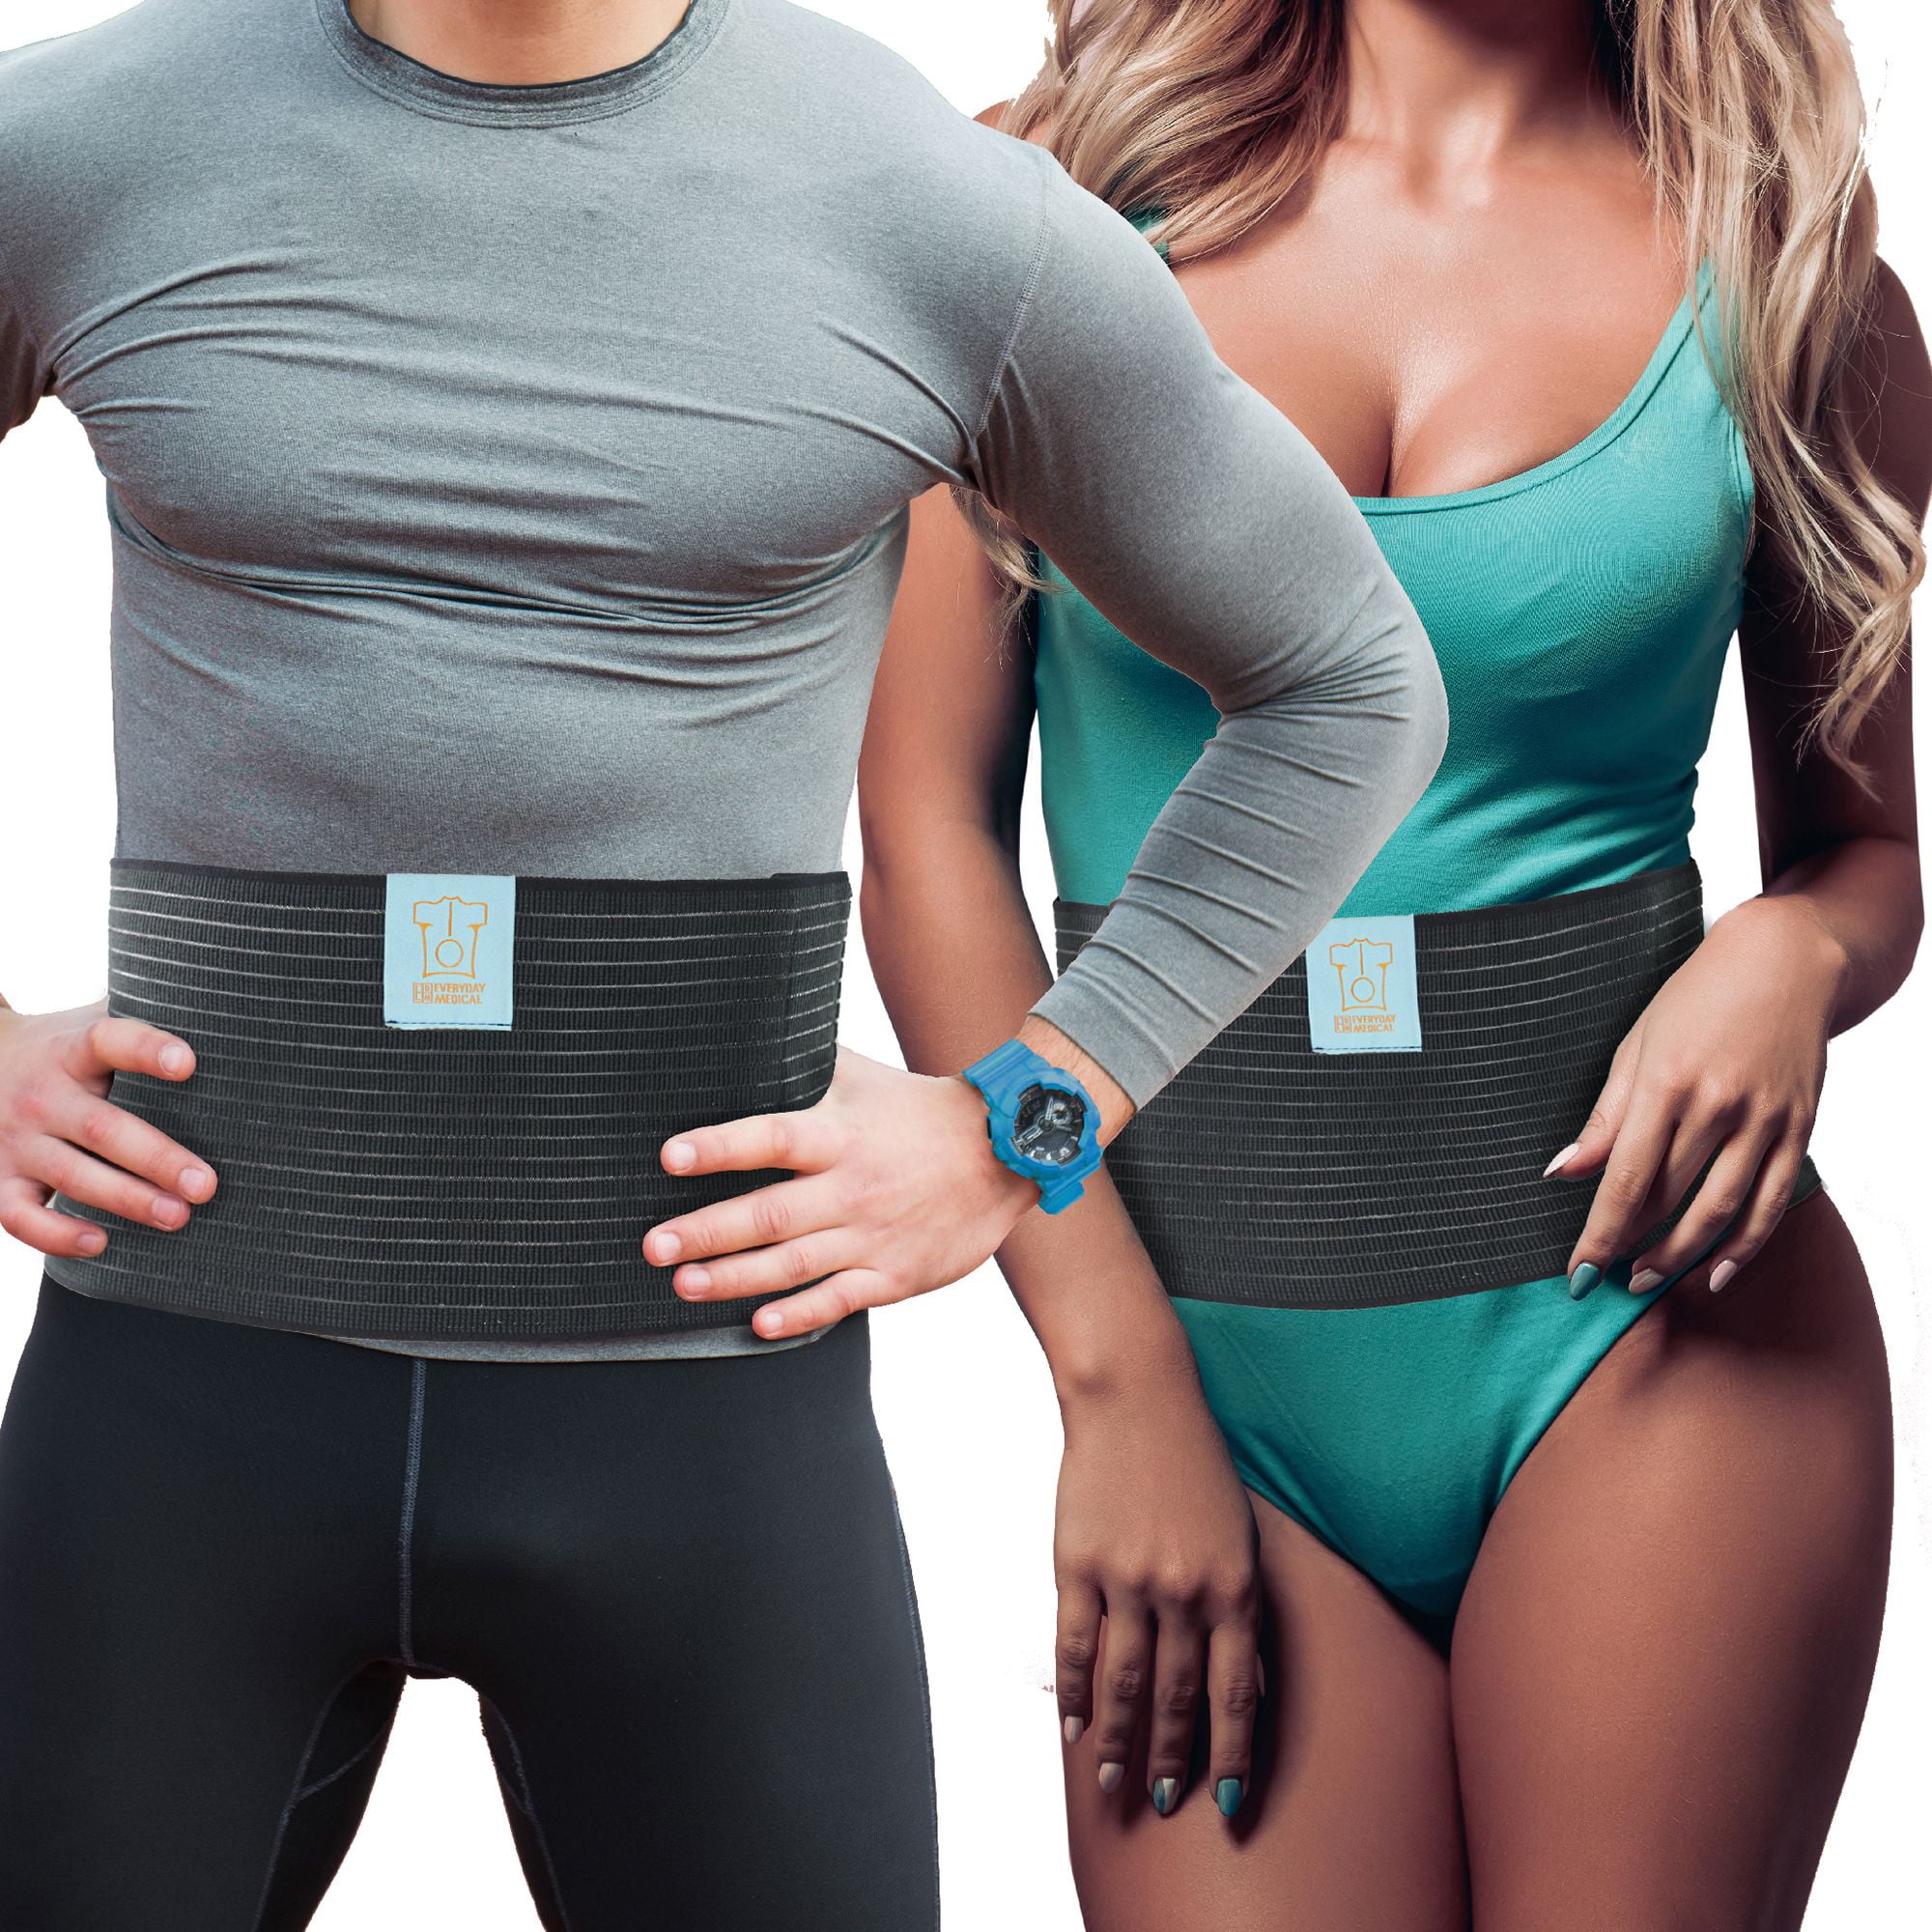 Everyday Medical Post Surgery Abdominal Binder for Men and Women - Medical  Grade Stomach Compression Brace for Waist and Abdomen Surgeries Such as